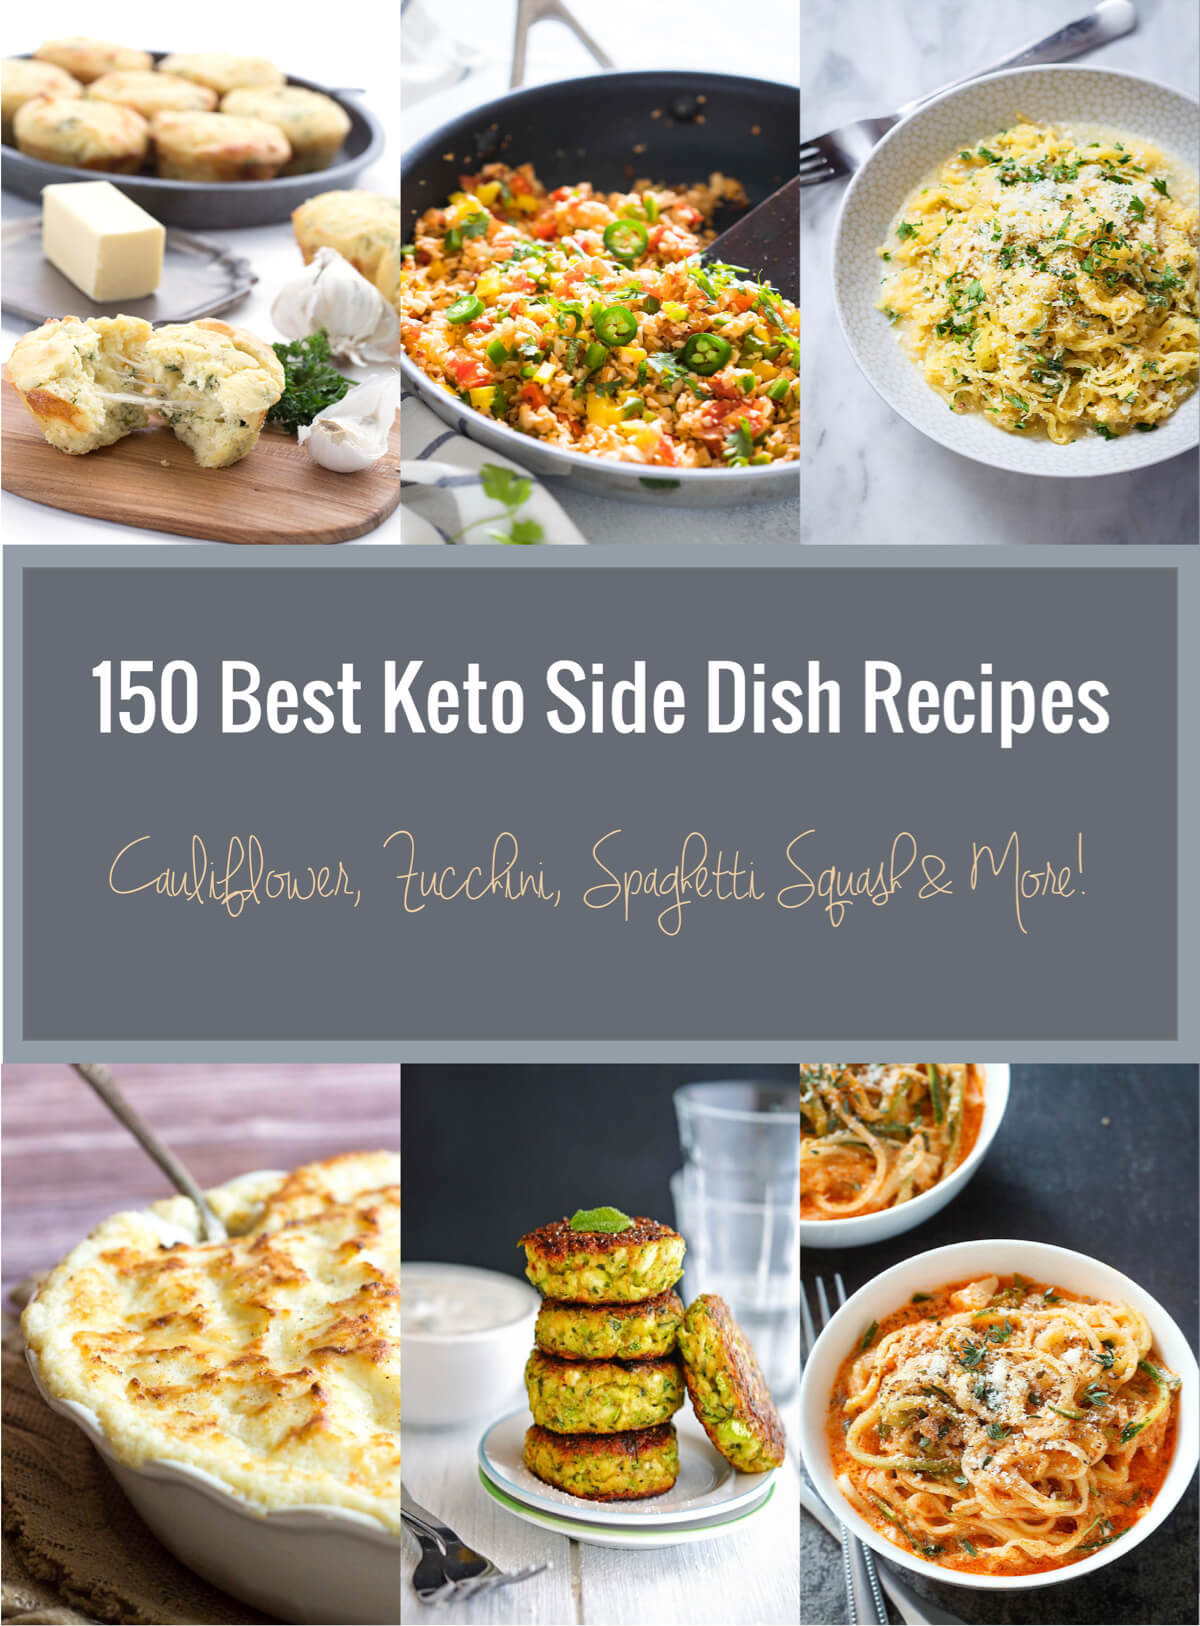 Easy Keto Side Dishes
 150 Best Keto Side Dish Recipes Low Carb